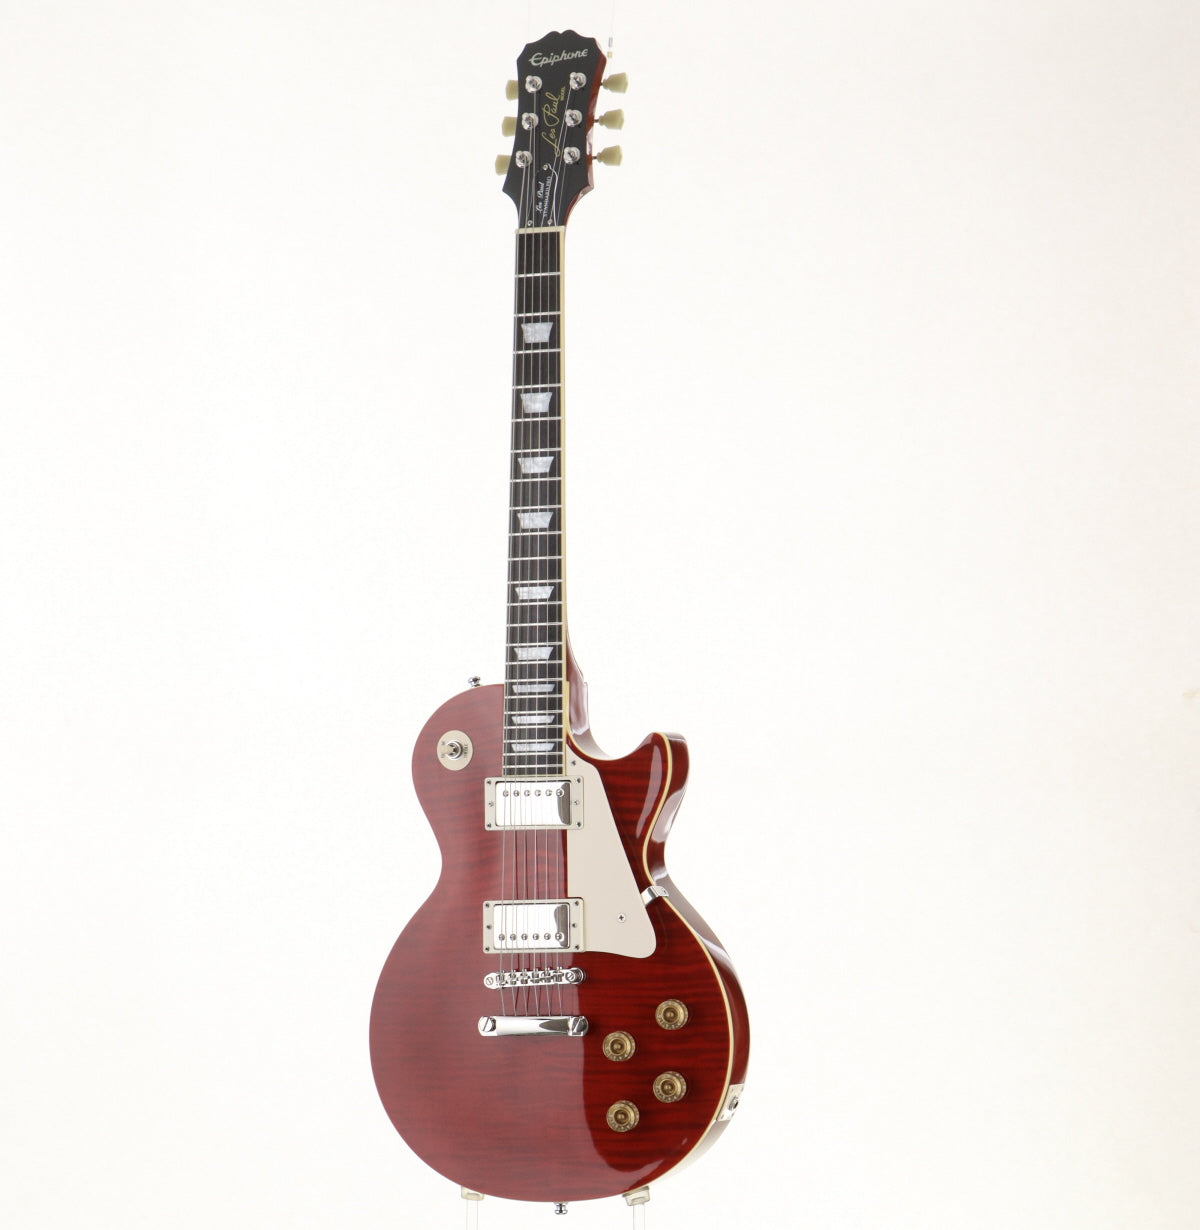 [SN 17031514340] USED Epiphone / Les Paul Standard Plus Top Pro Wine Red 2017 [08]